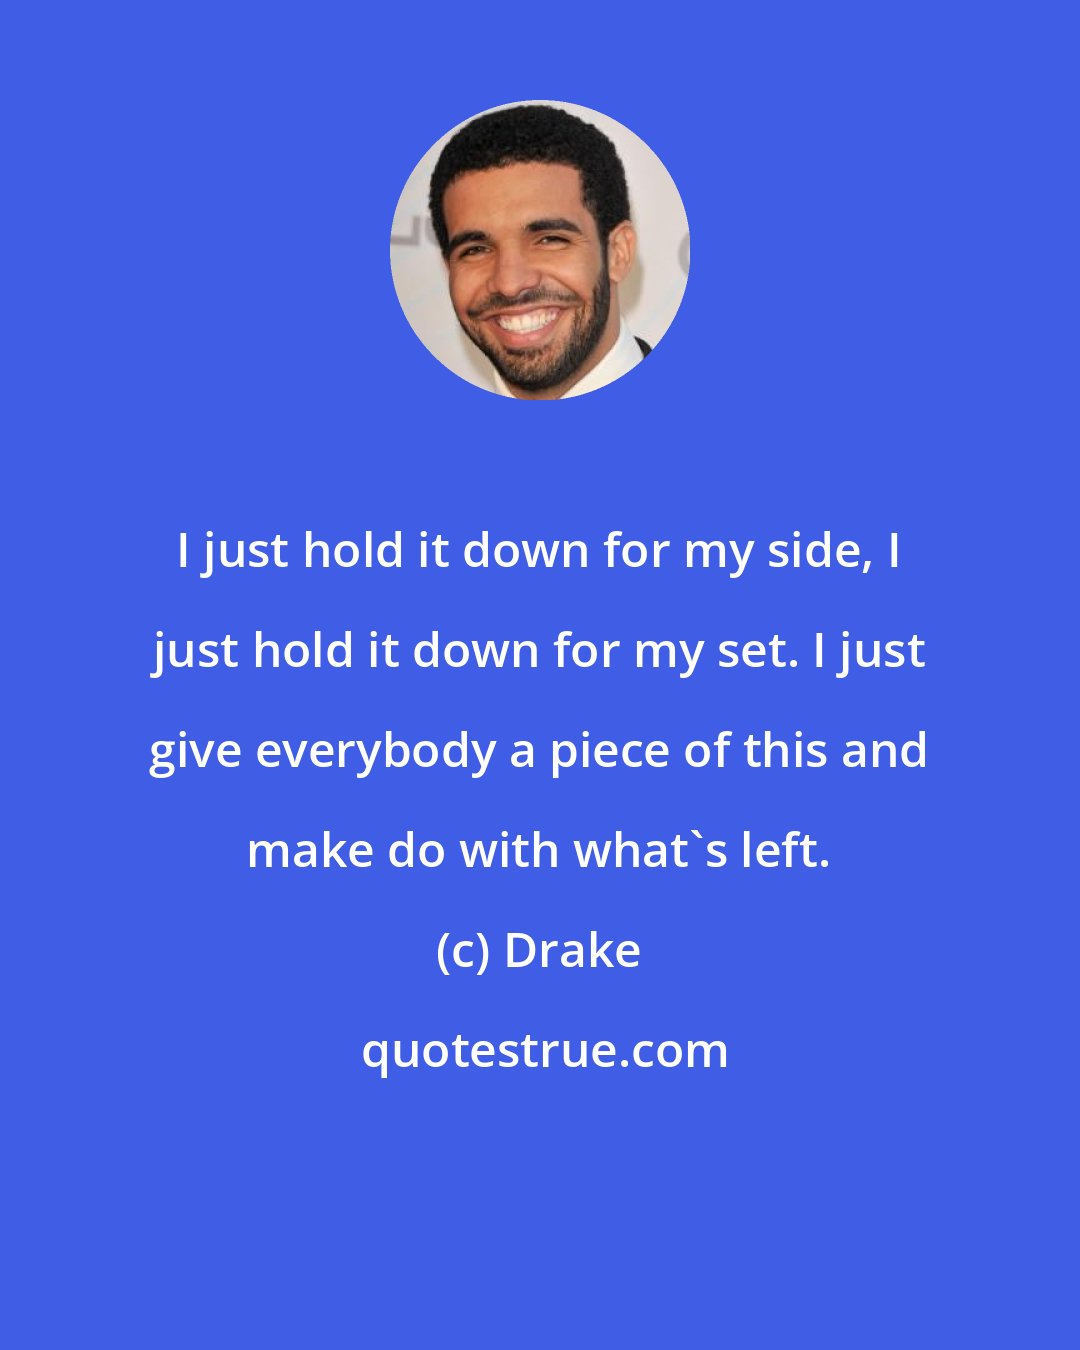 Drake: I just hold it down for my side, I just hold it down for my set. I just give everybody a piece of this and make do with what's left.